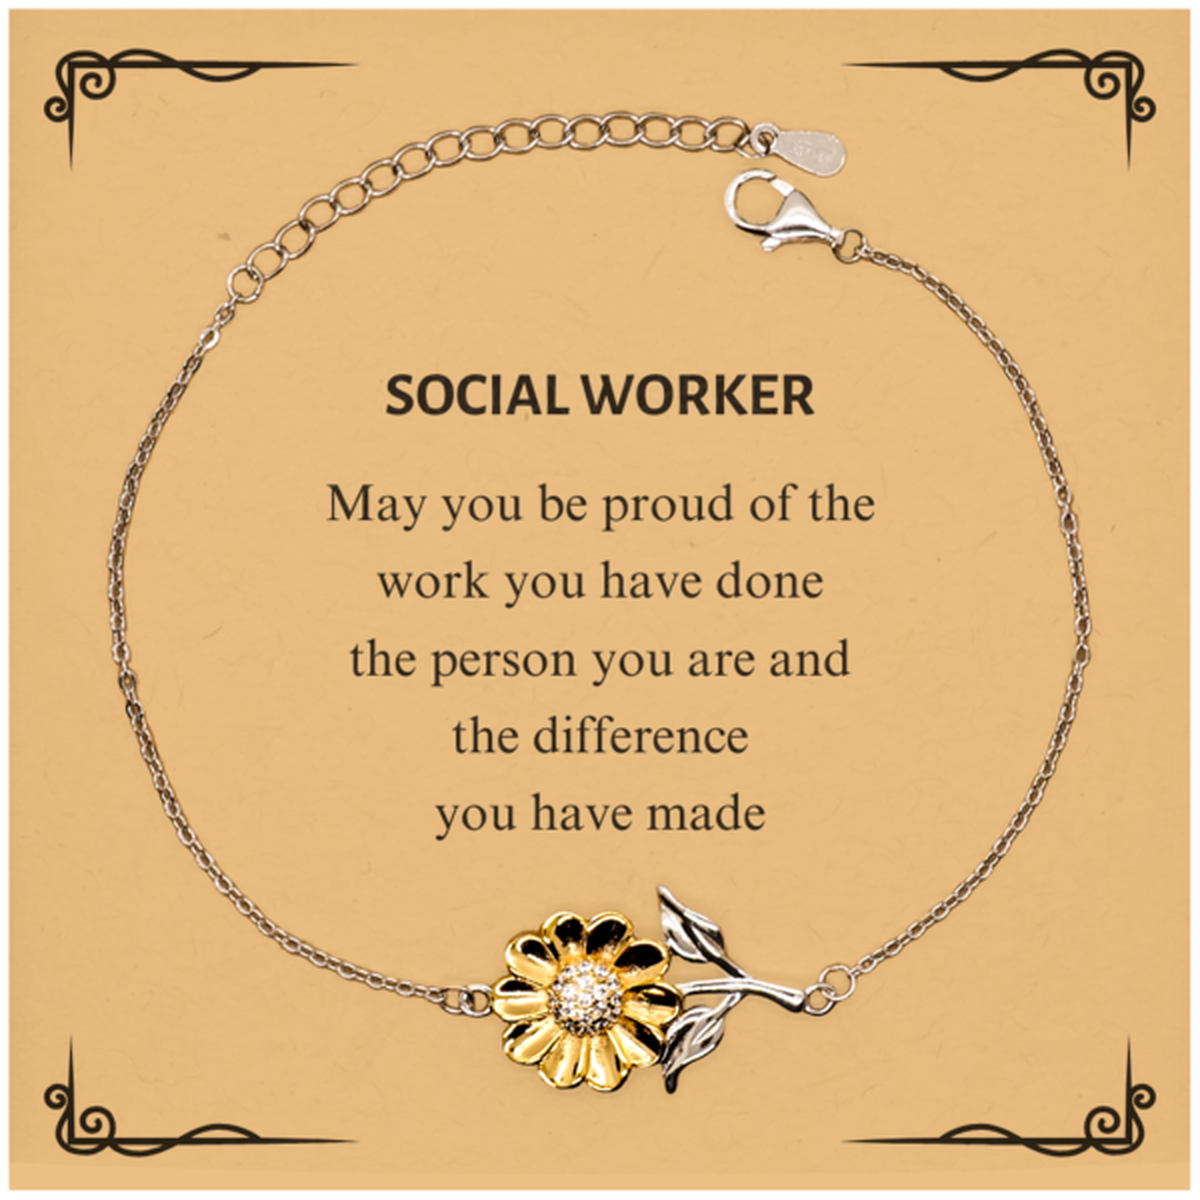 Social Worker May you be proud of the work you have done, Retirement Social Worker Sunflower Bracelet for Colleague Appreciation Gifts Amazing for Social Worker